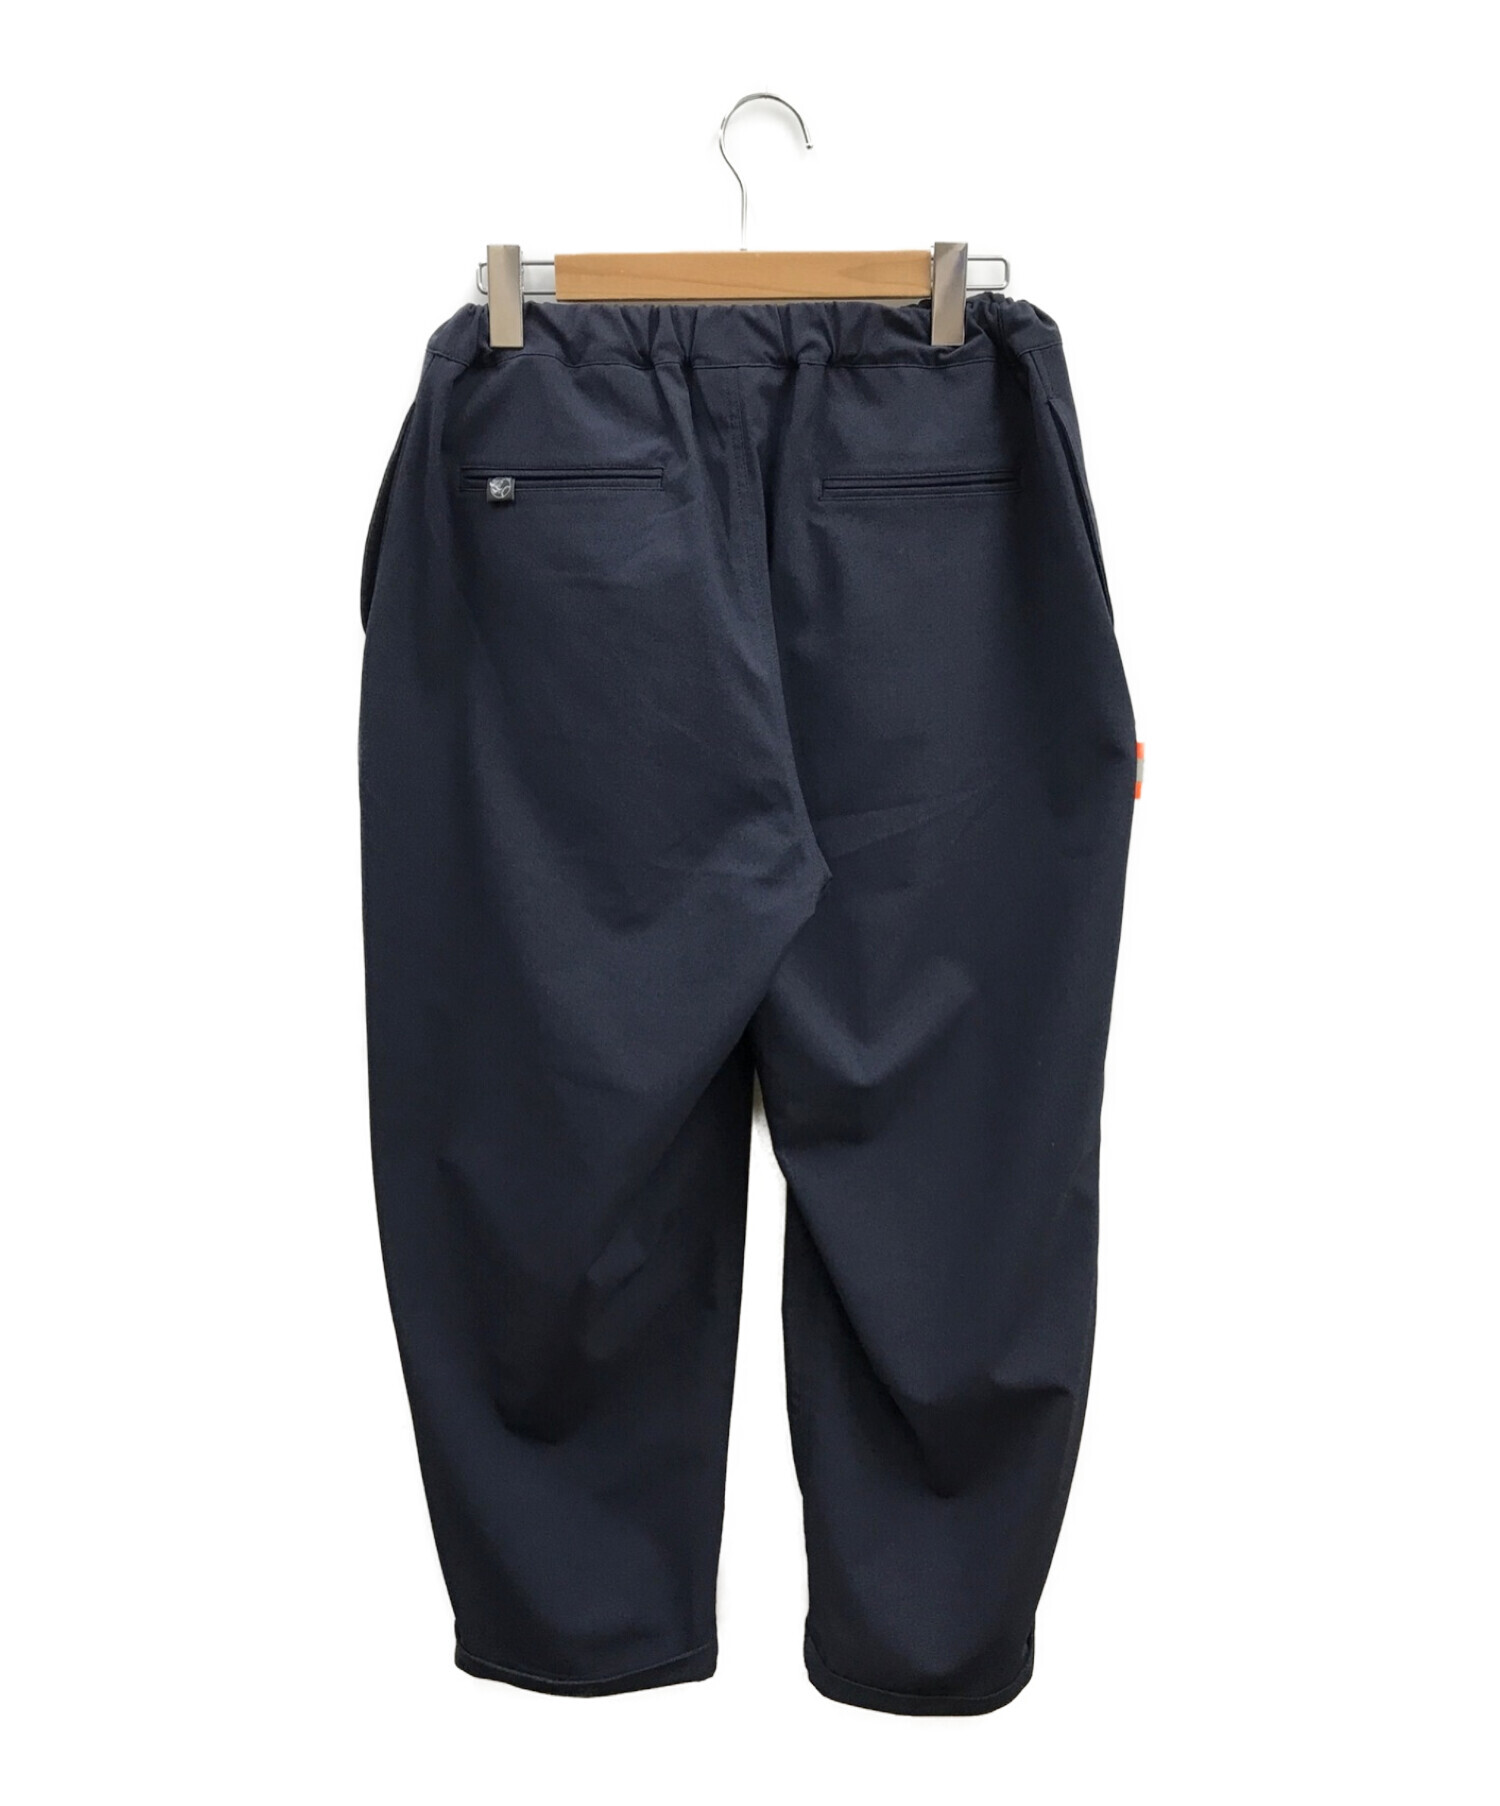 Props Store/ Stretch Nylon Easy Trousers - スラックス